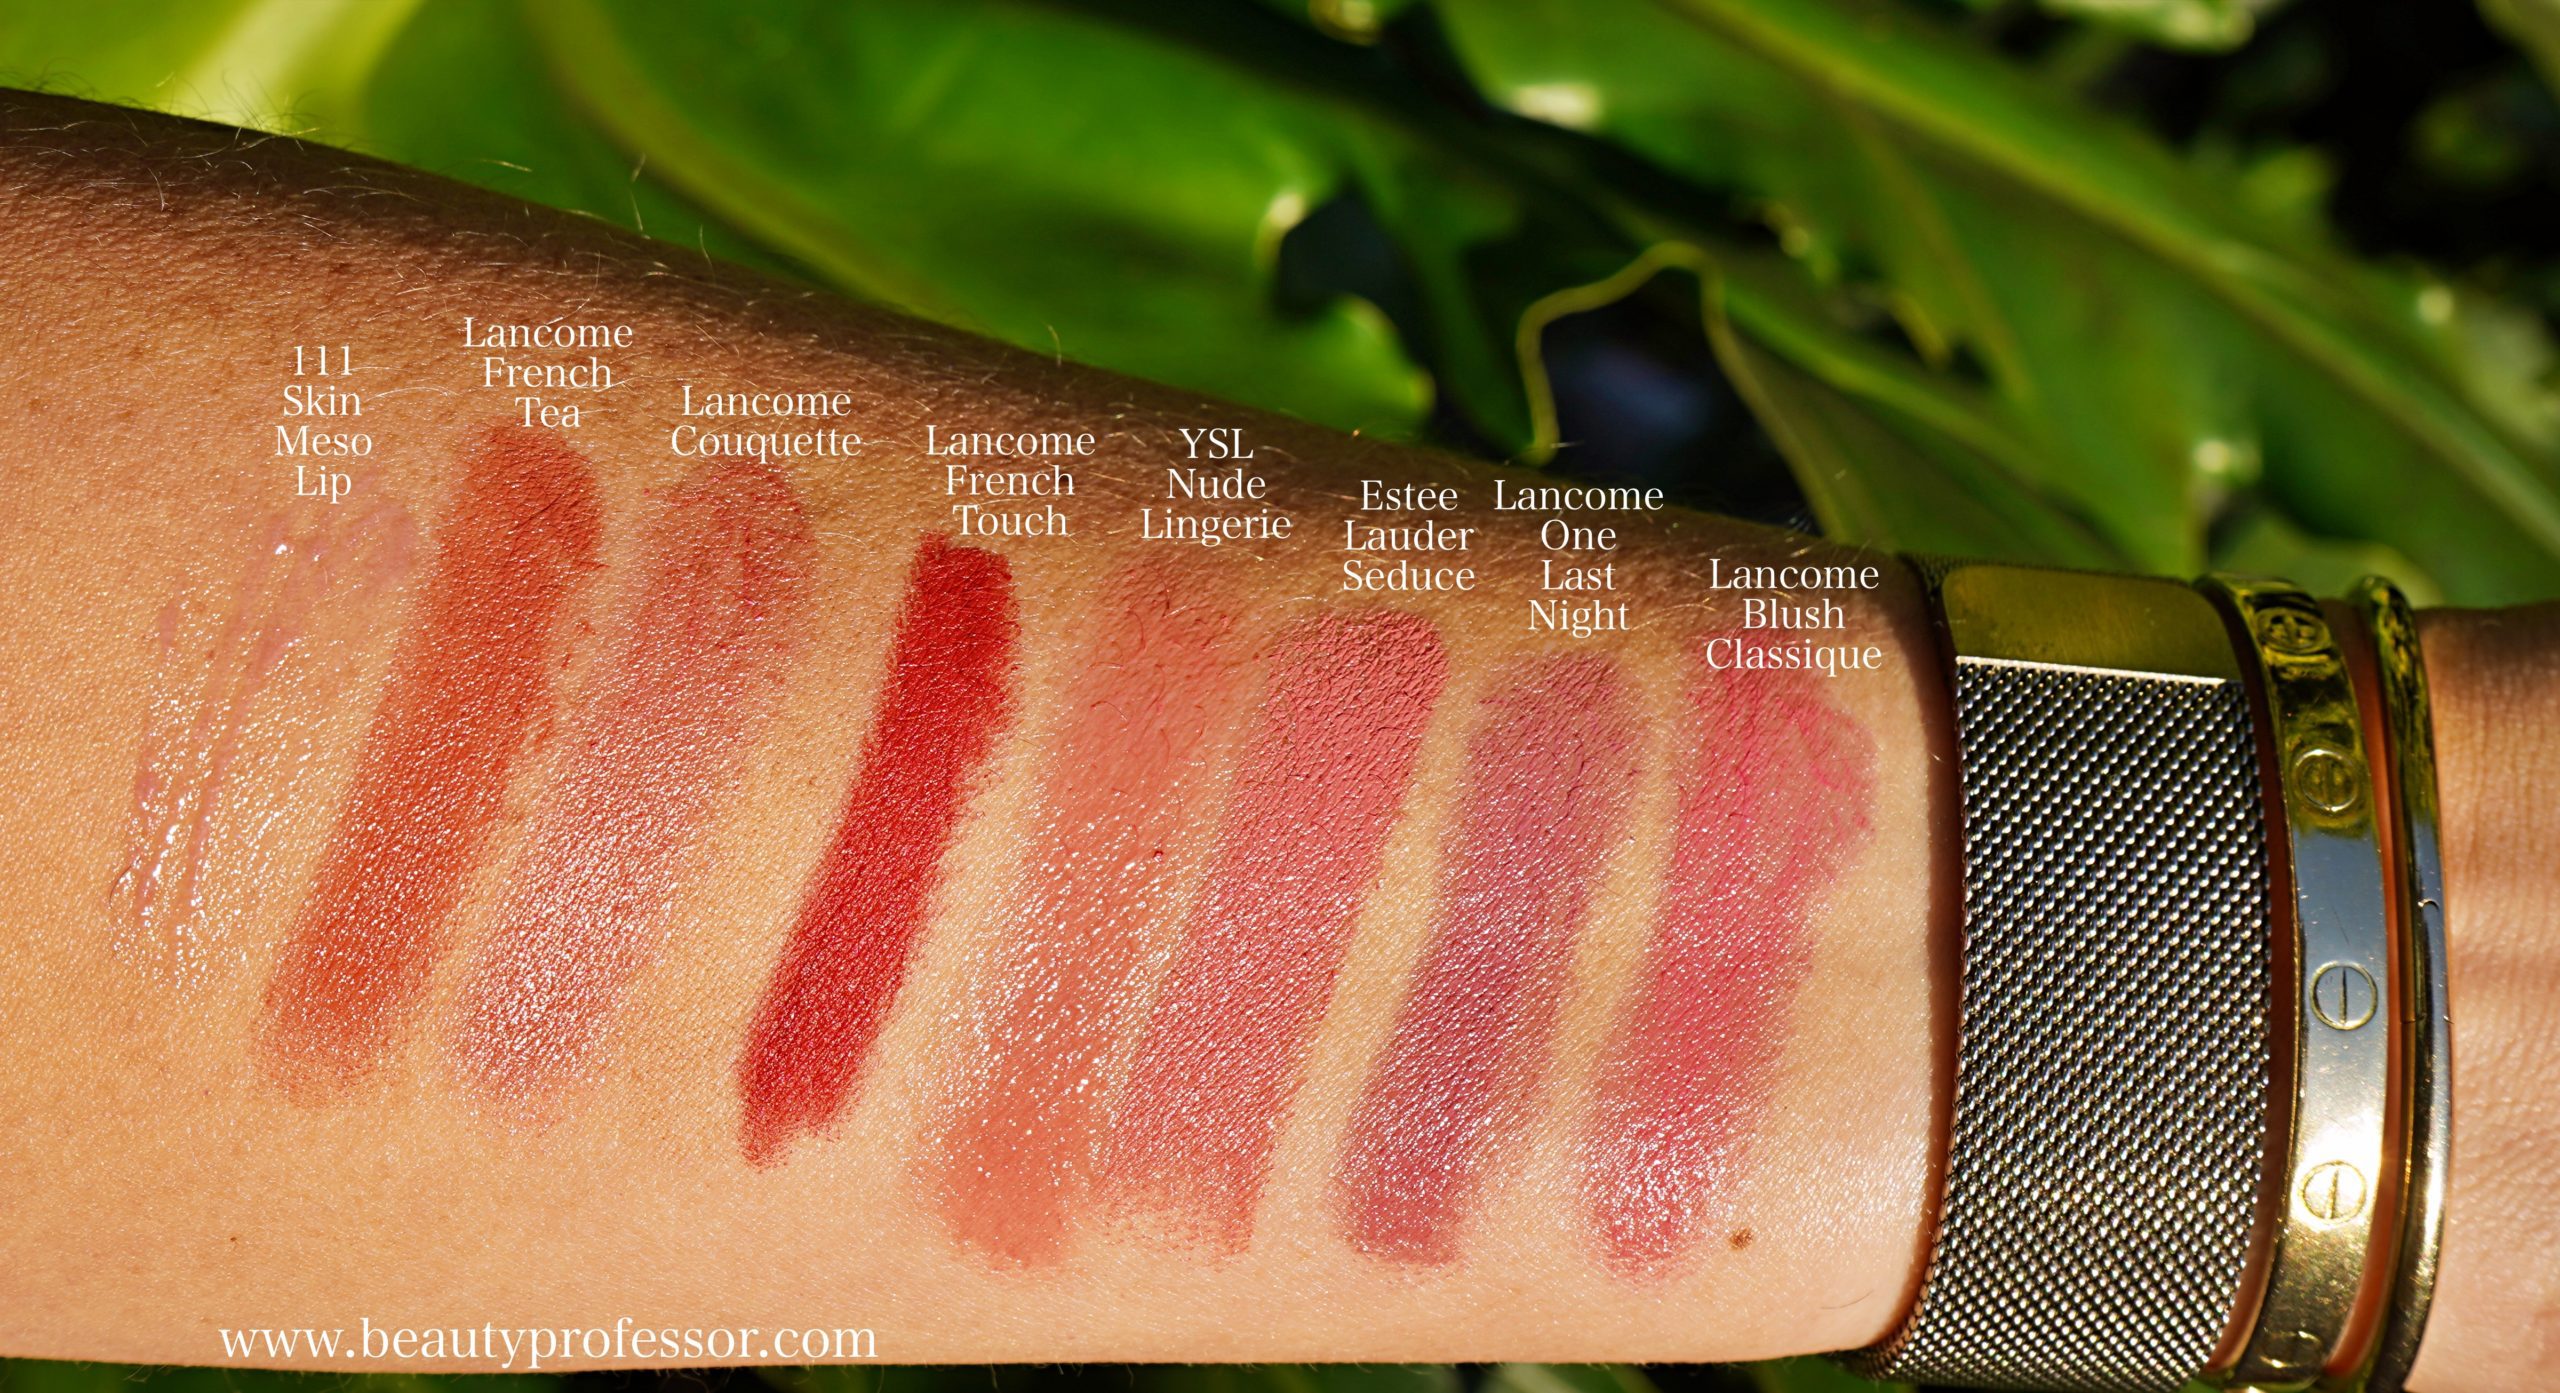 lancome lipstick swatches from January refresh